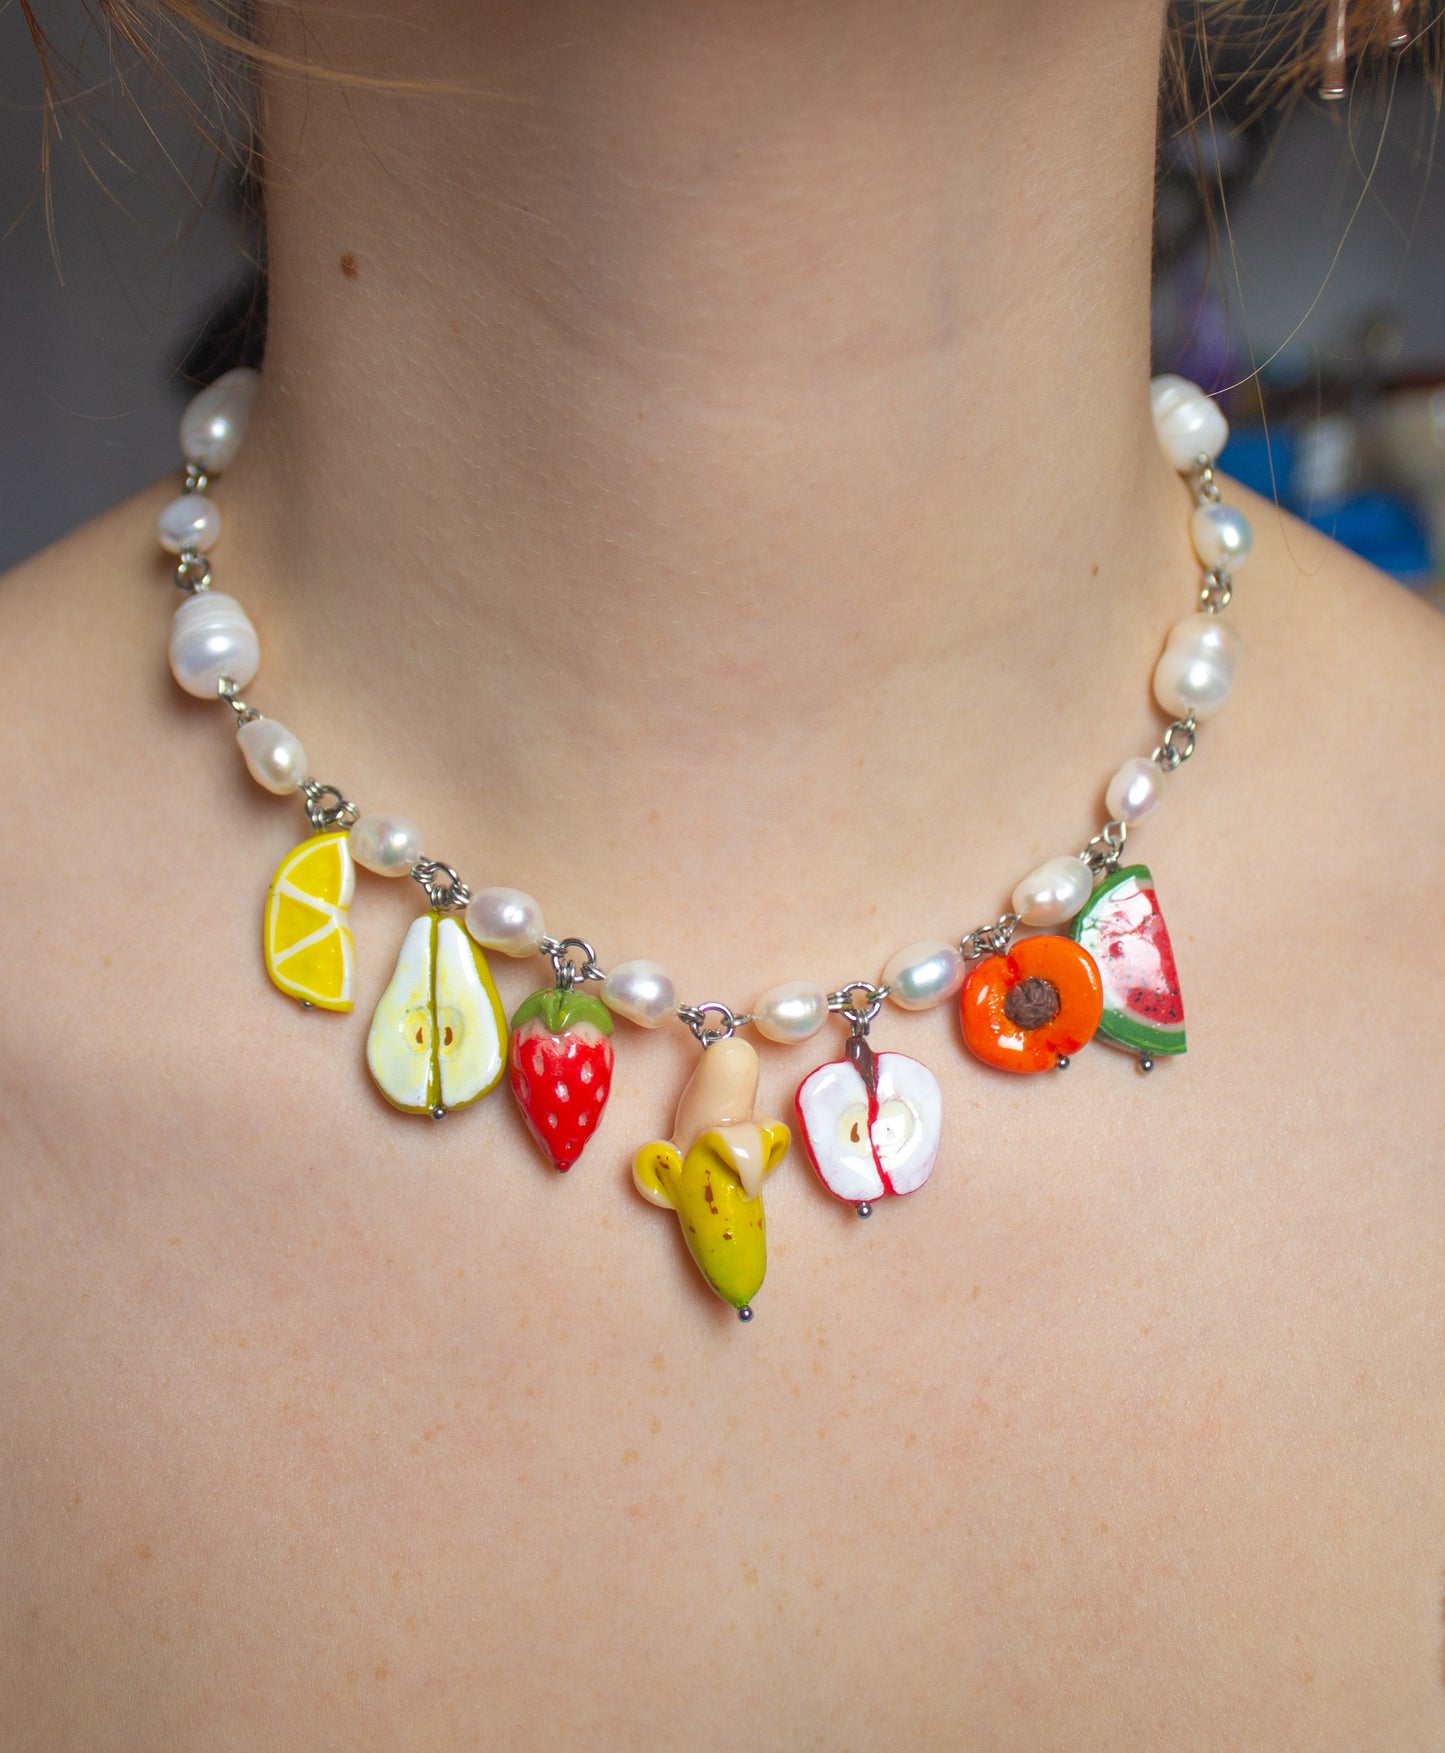 Fruity charm necklace